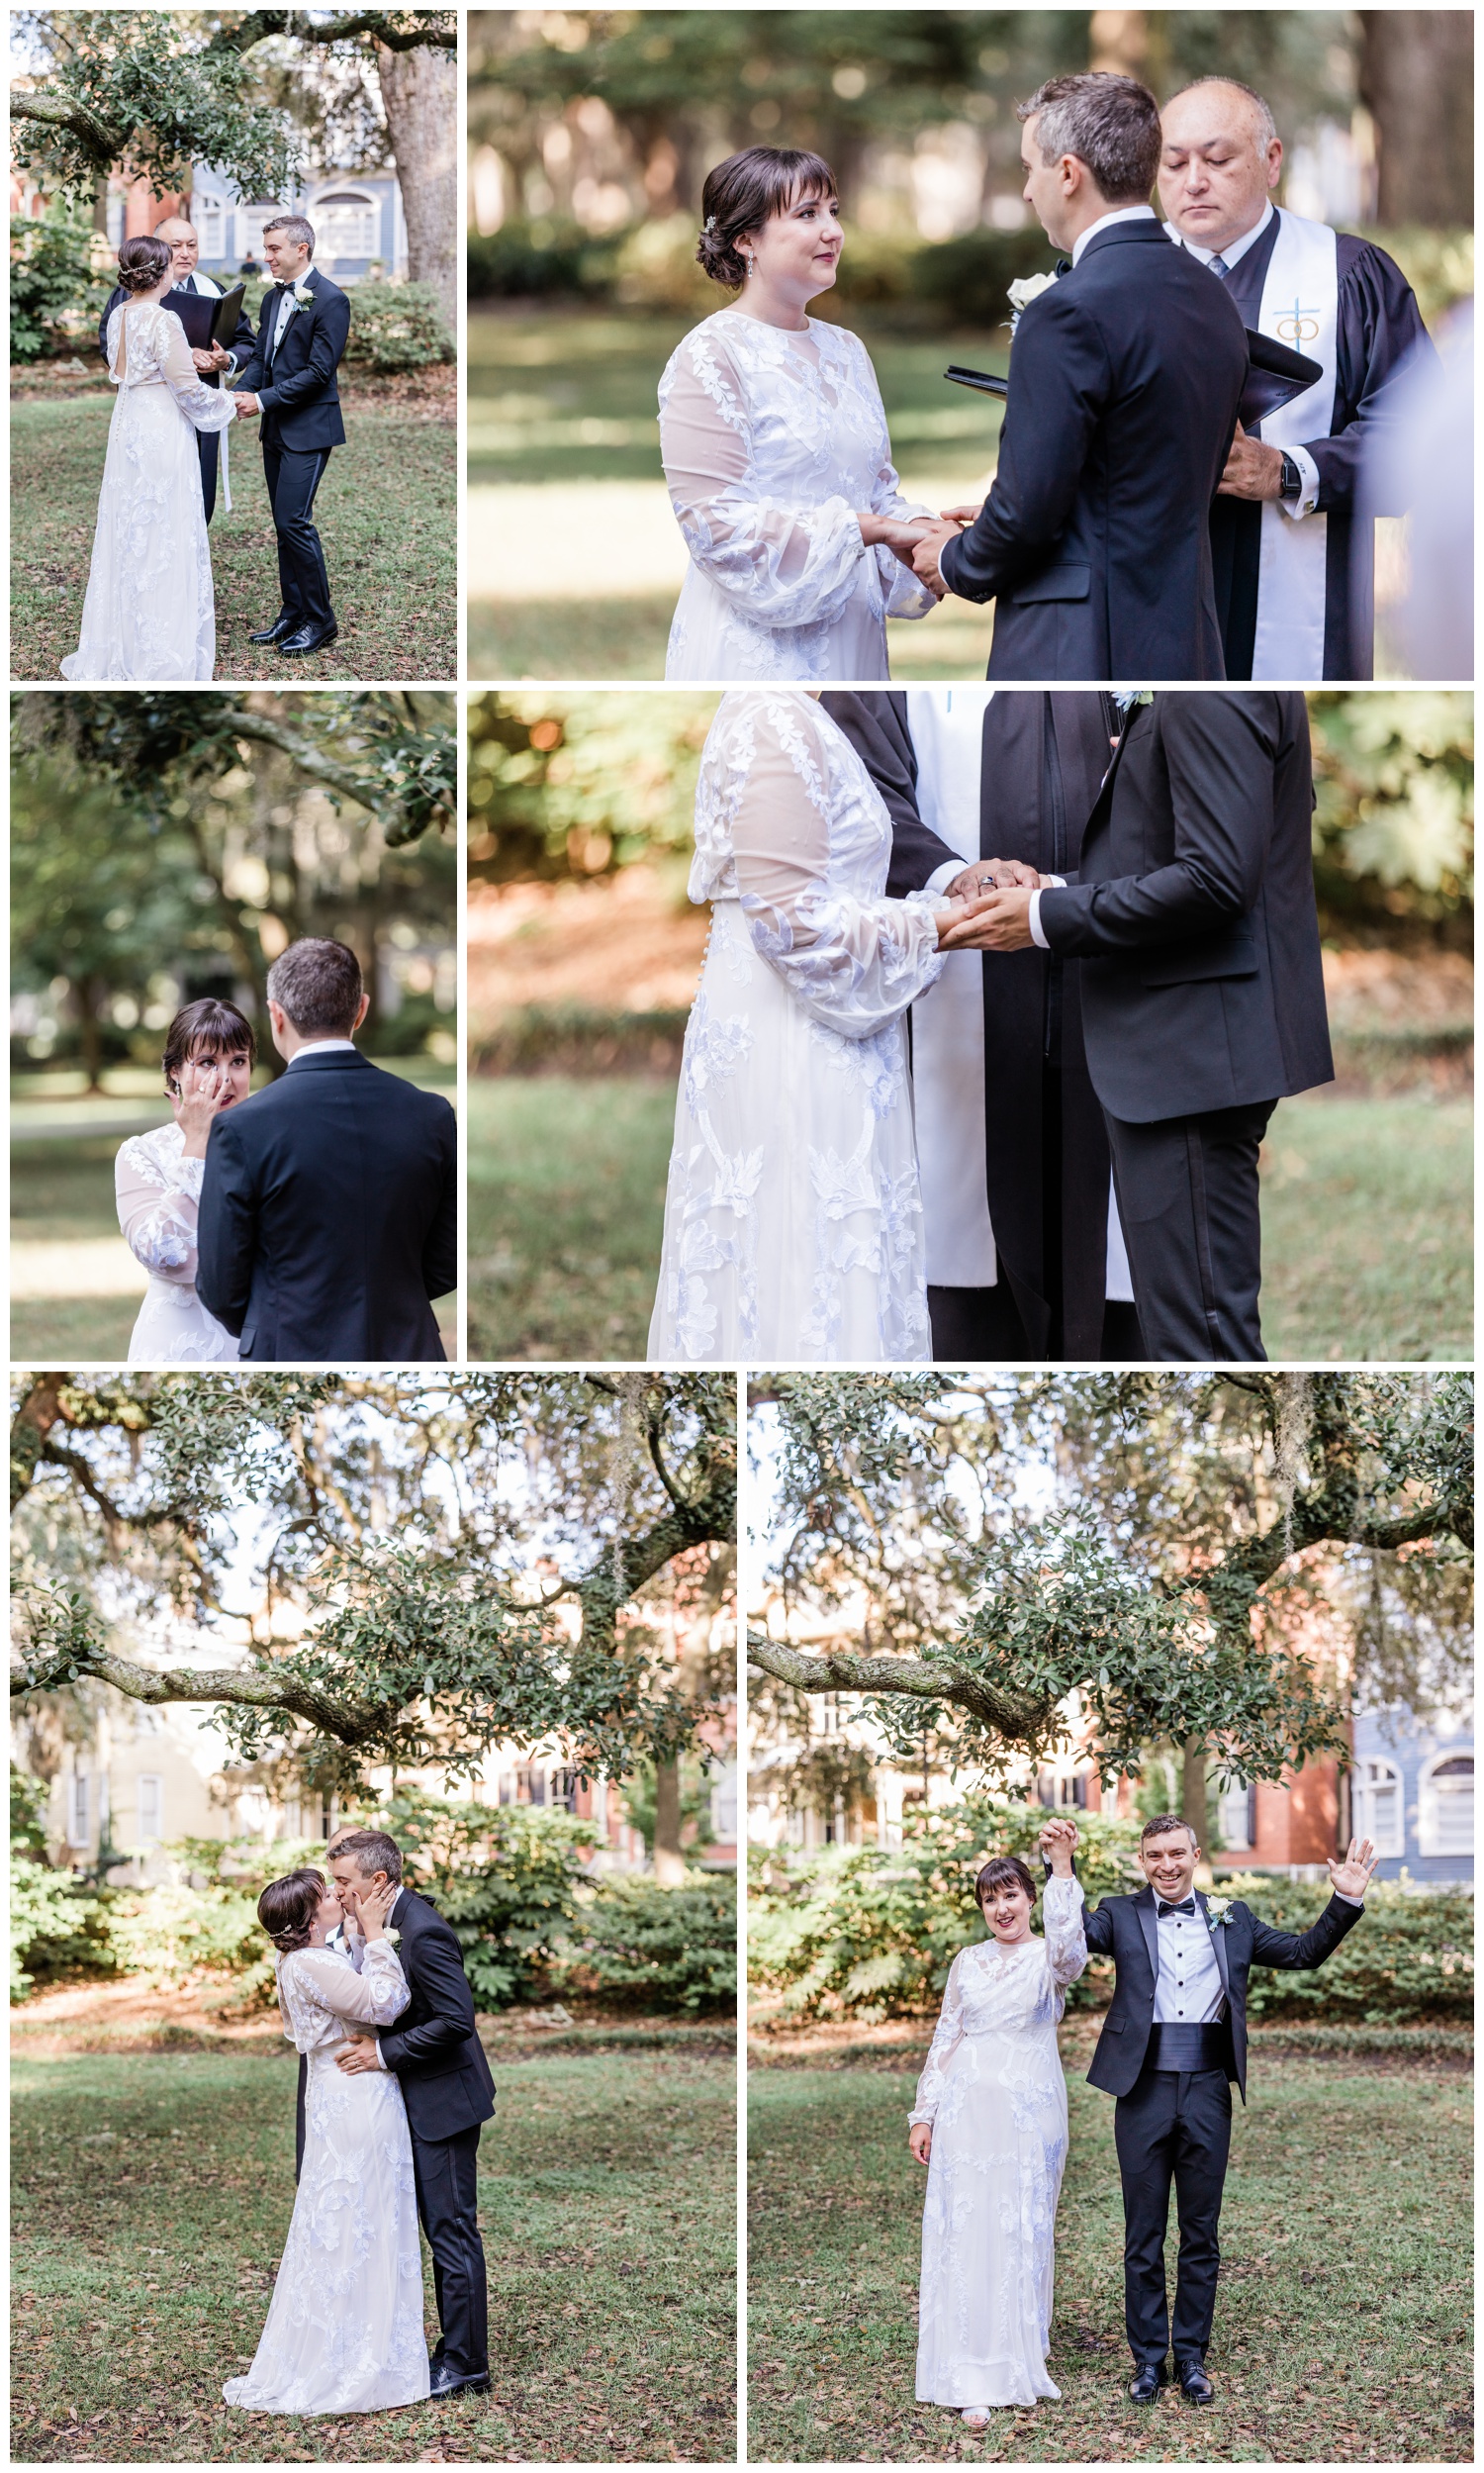 Ceremony at Forsyth Park - the savannah elopement package - officiating by Reverend Joe